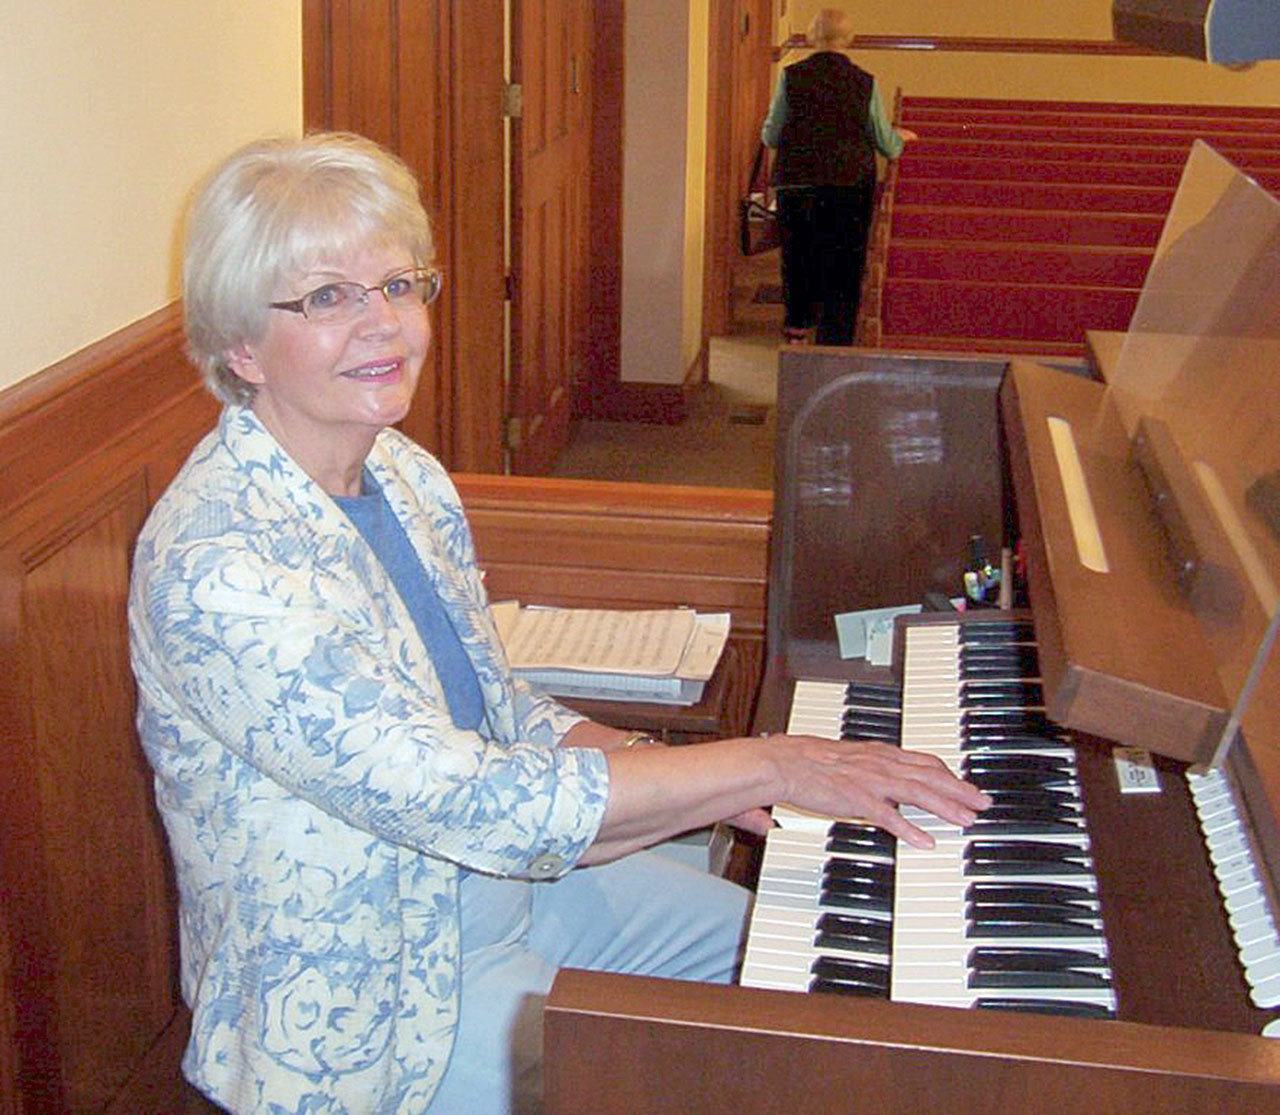 Anna Nichols, seen here, will perform Sunday during a special performance Sunday at Holy Trinity Lutheran Church, 301 East Lopez Ave. The concert will raise money for the church’s Monday Musicale Scholarship Fund. — Submitted.